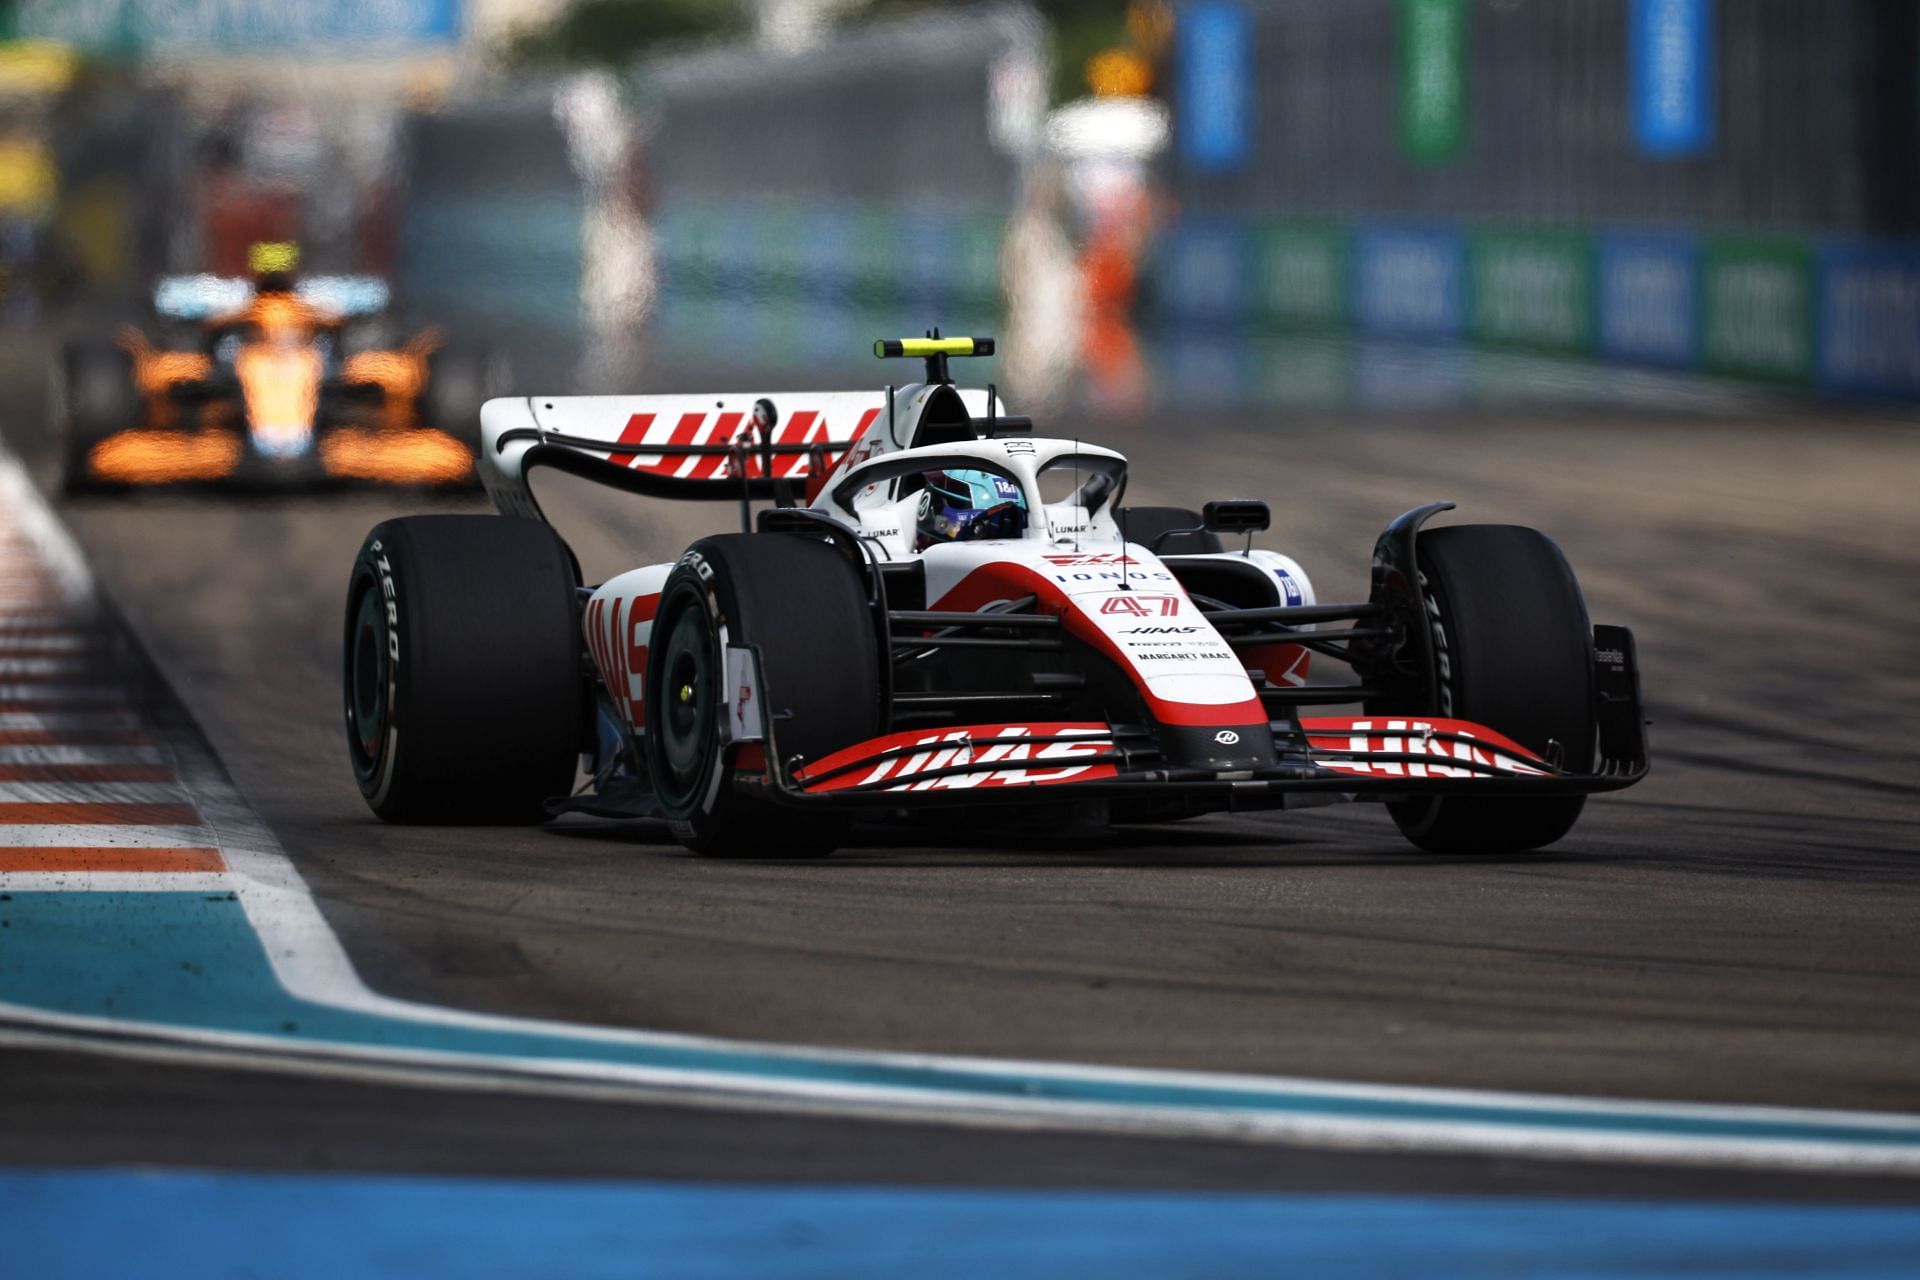 Haas F1 driver Mick Schumacher in action during the 2022 F1 Miami GP (Photo by Chris Graythen/Getty Images)